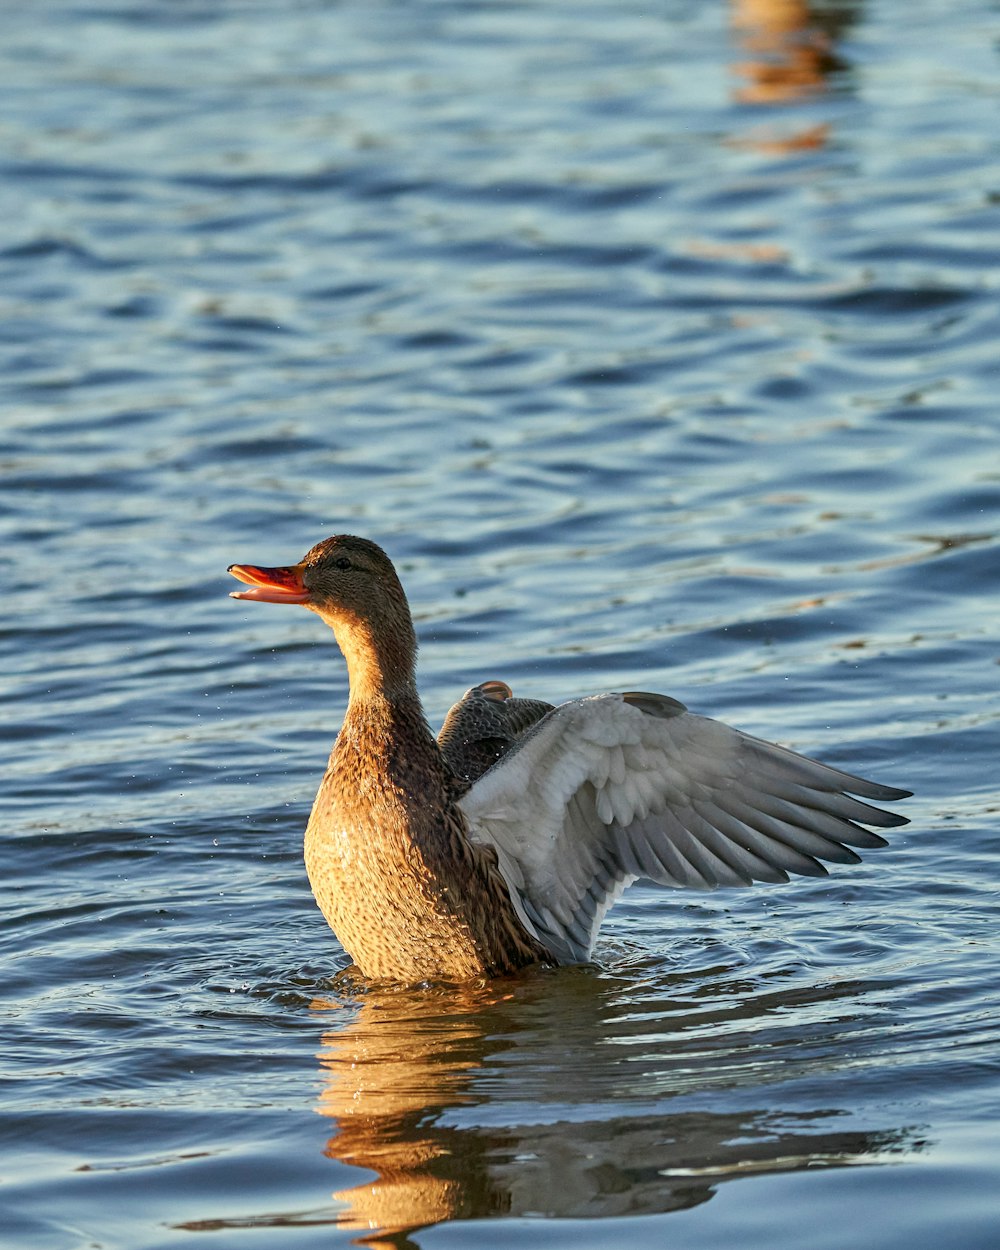 a duck flapping its wings in the water